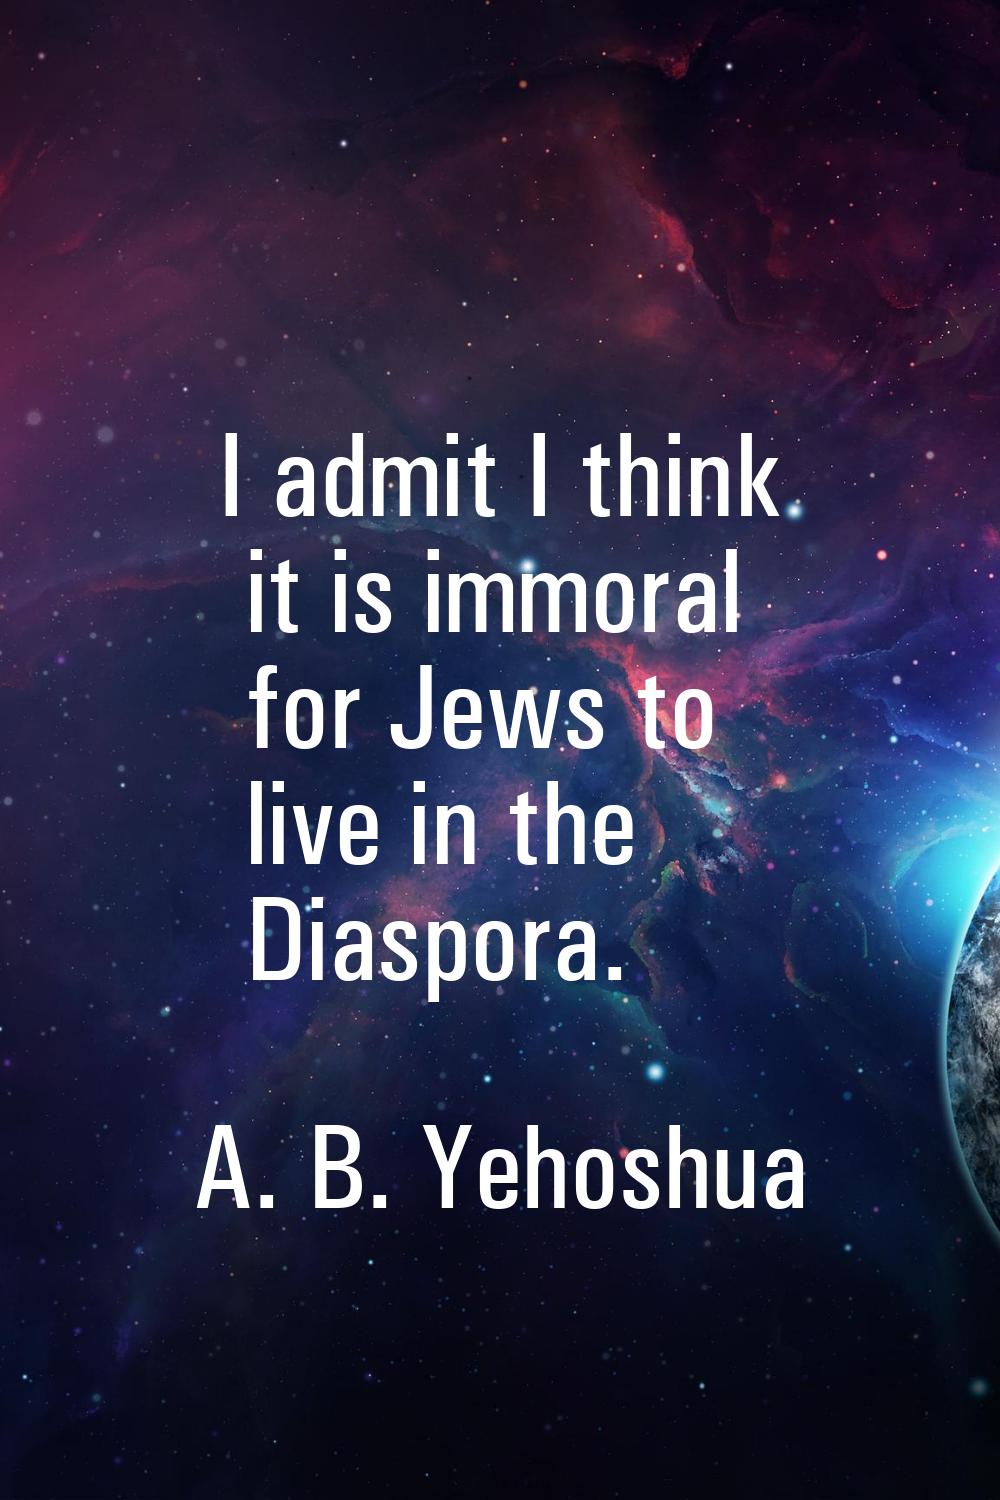 I admit I think it is immoral for Jews to live in the Diaspora.